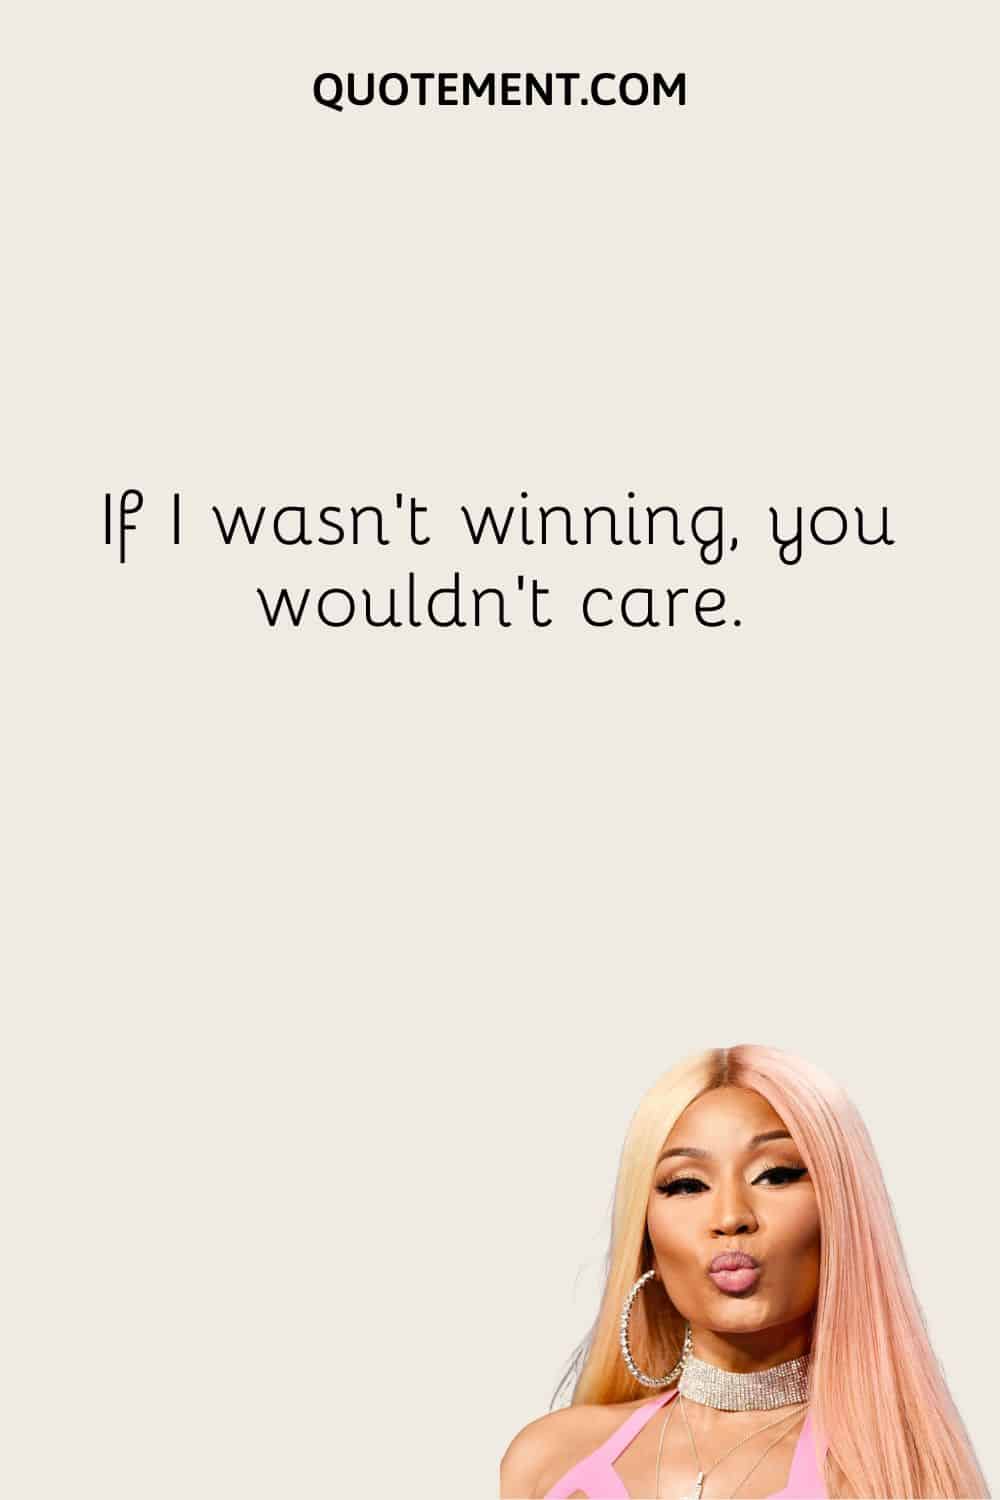 If I wasn’t winning, you wouldn’t care